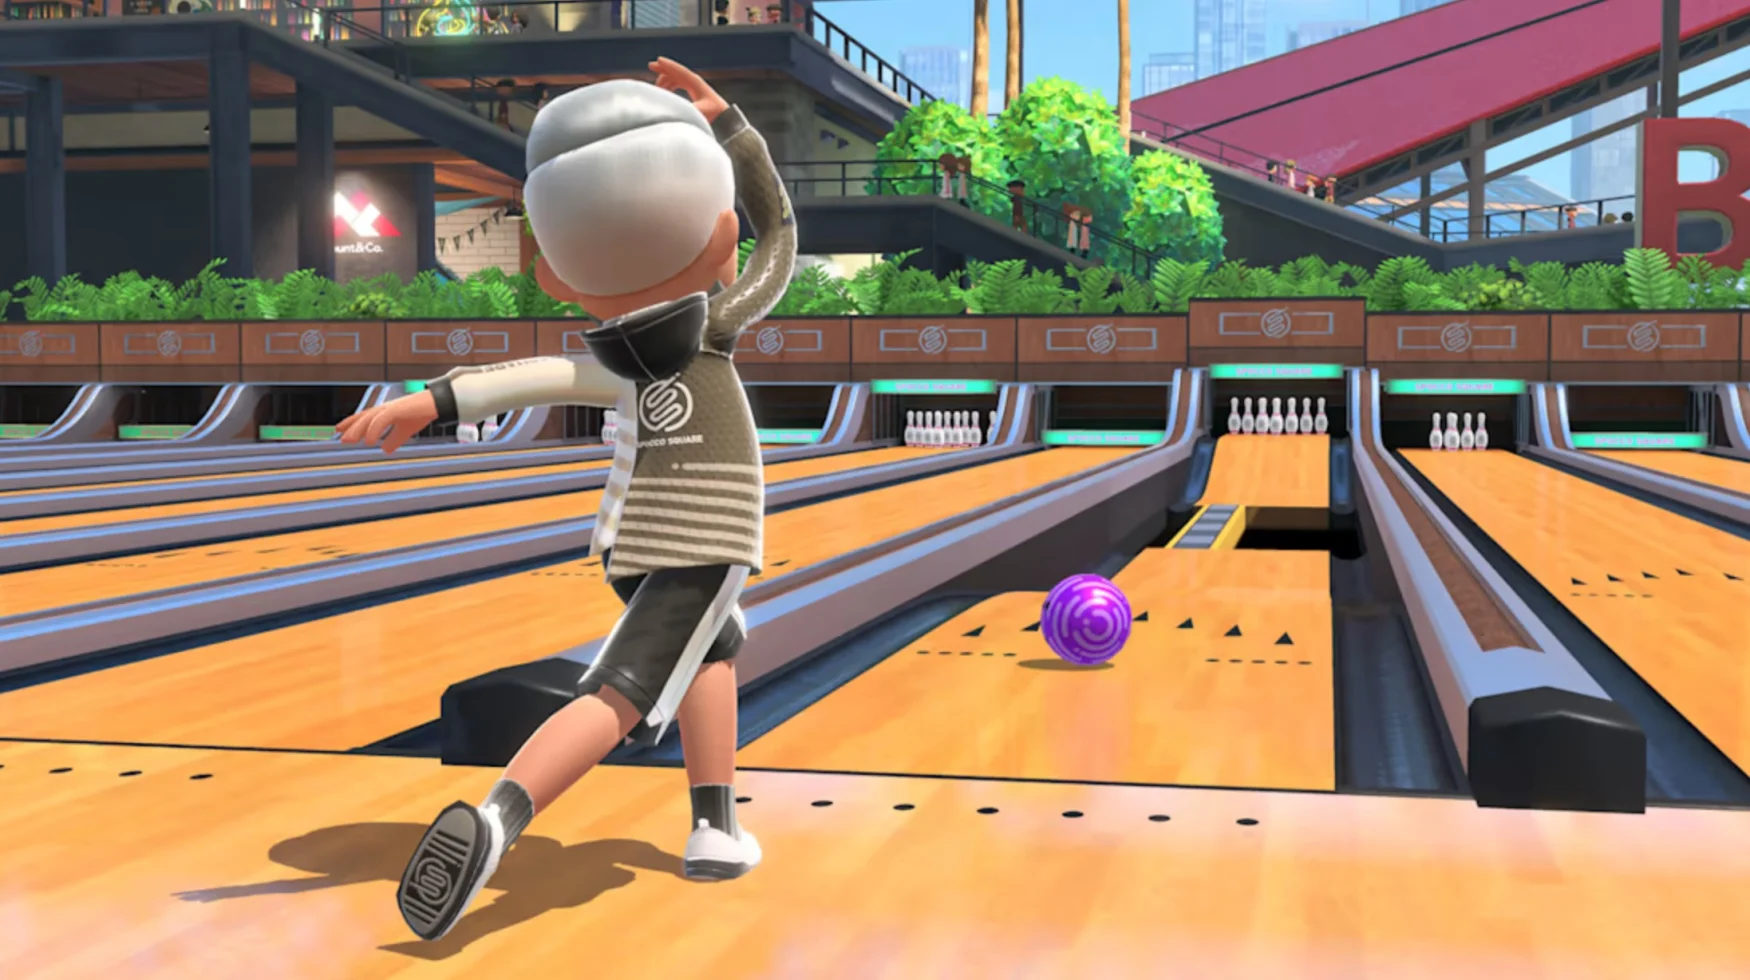 Bowling is one of the two games returning from Wii Sports in Nintendo Switch Sports